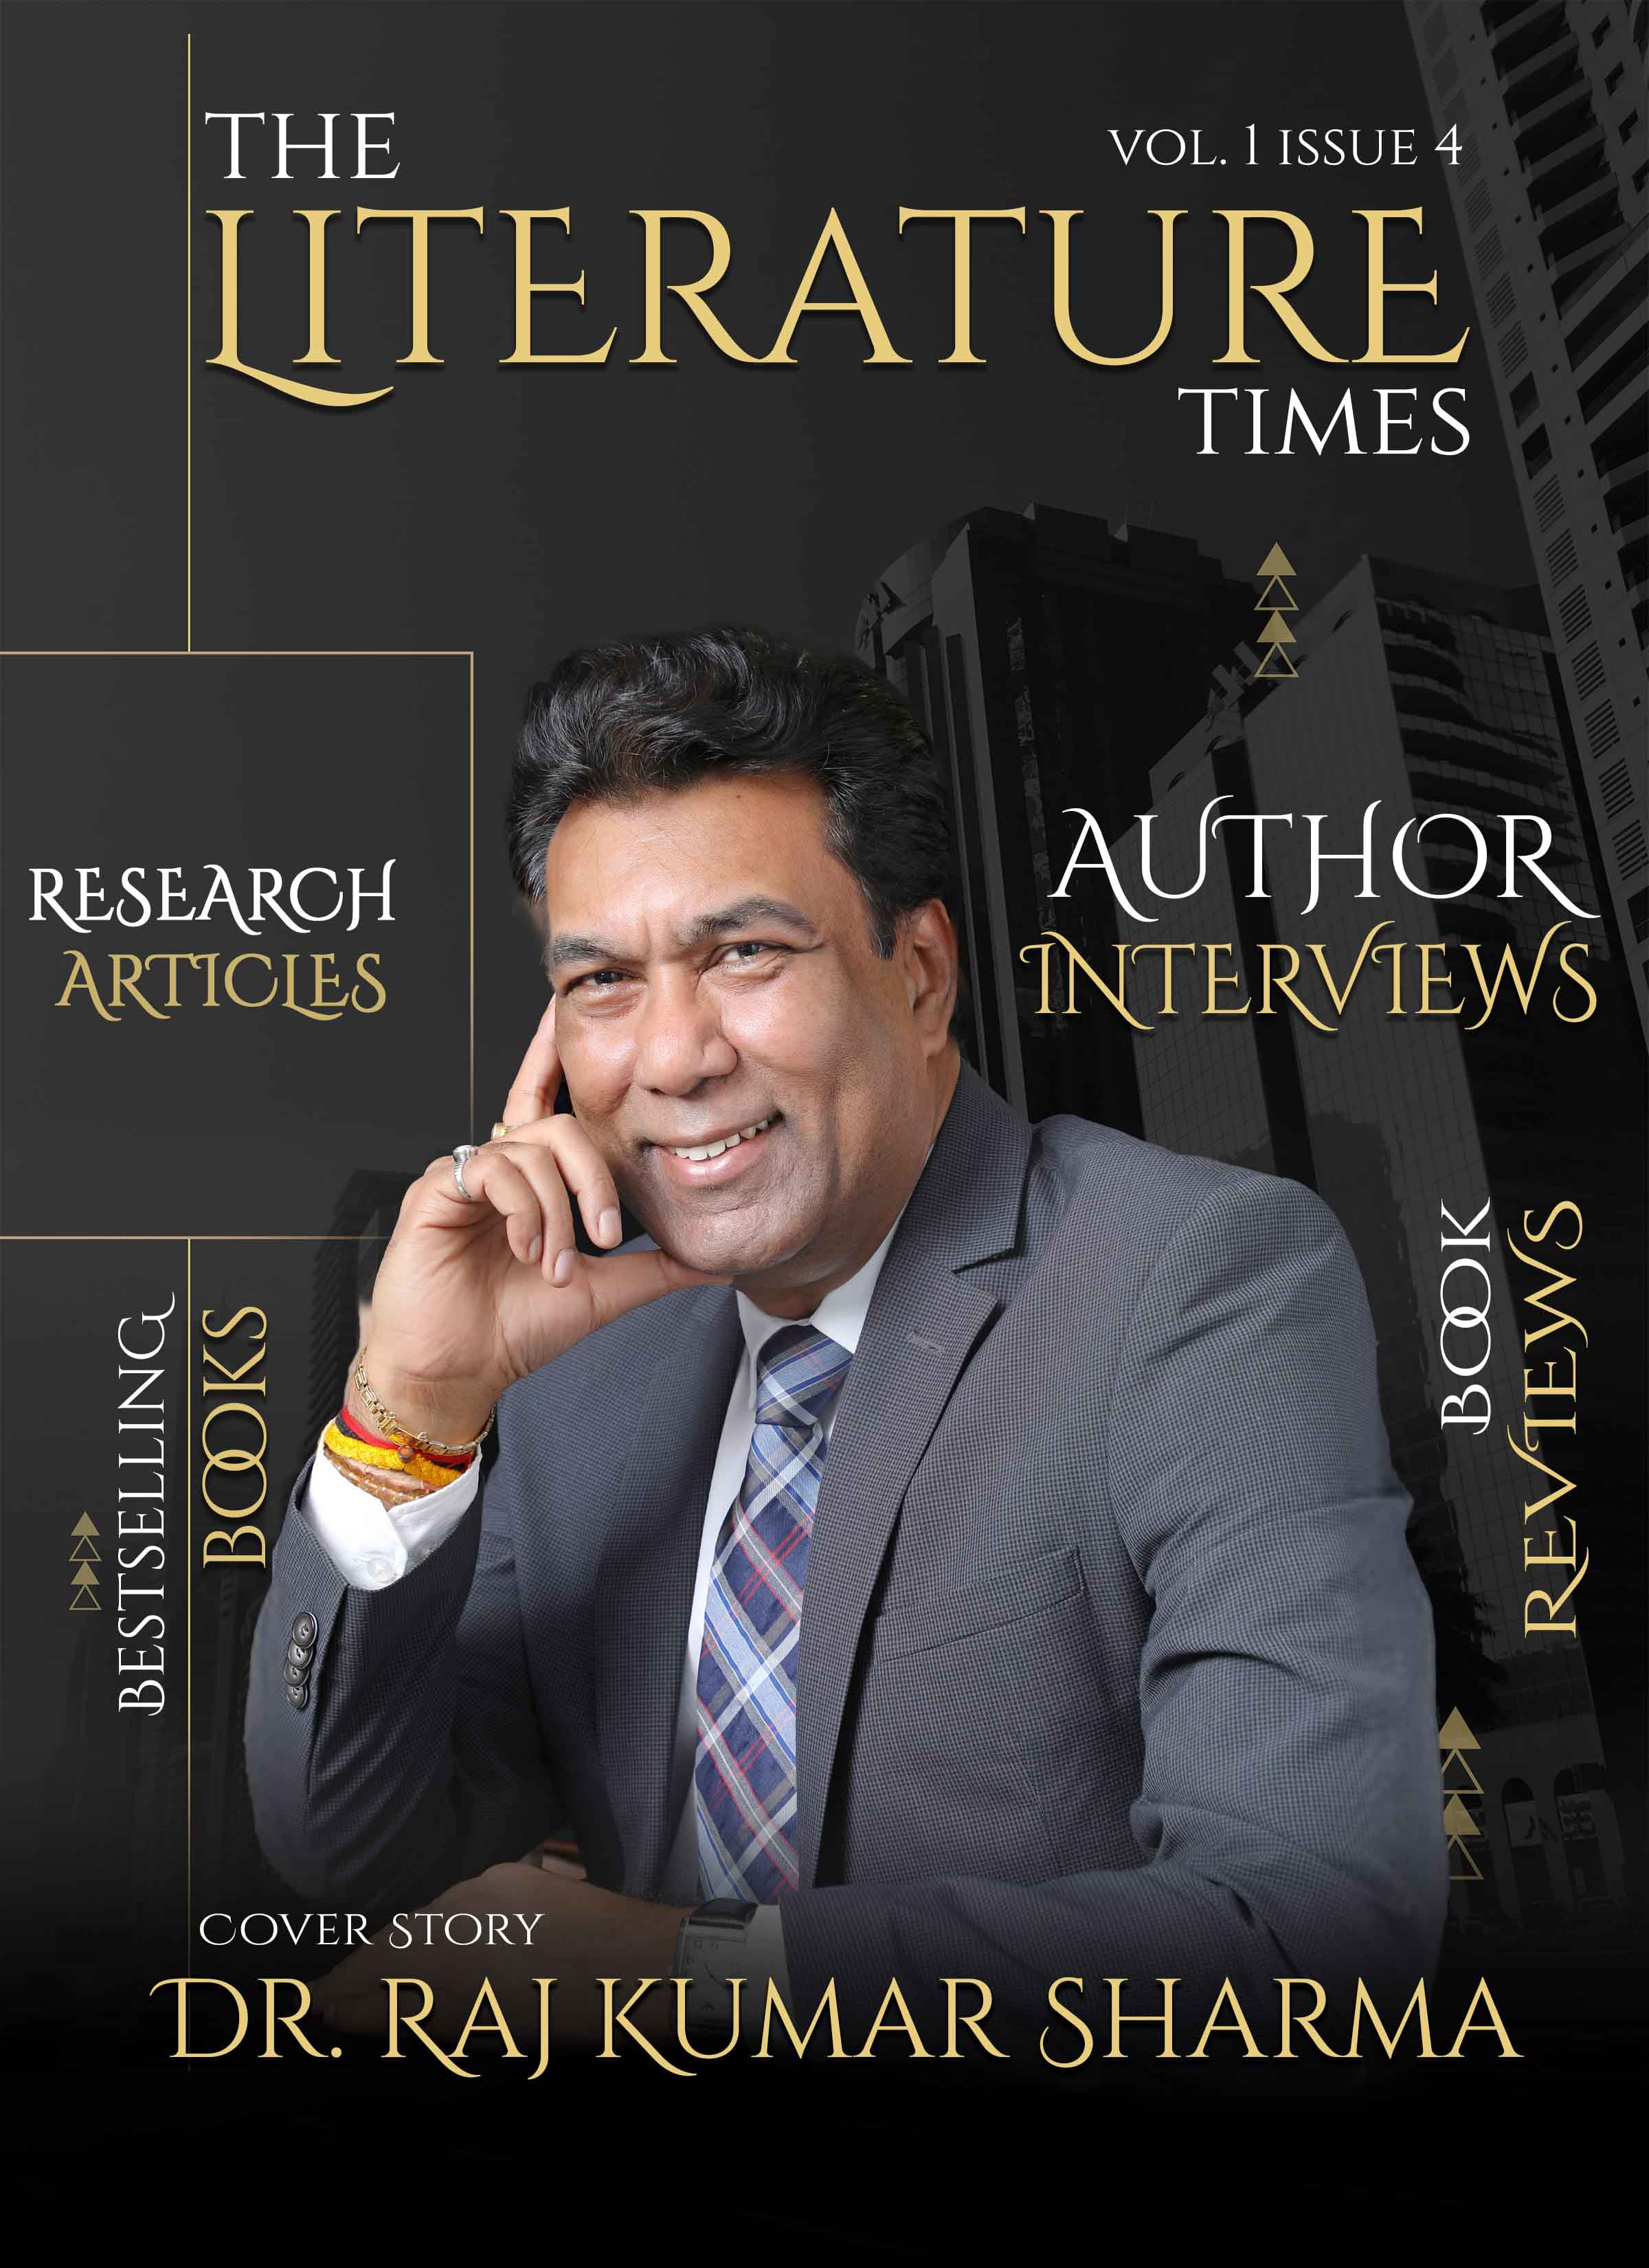 The literature times vol 1 issue 4